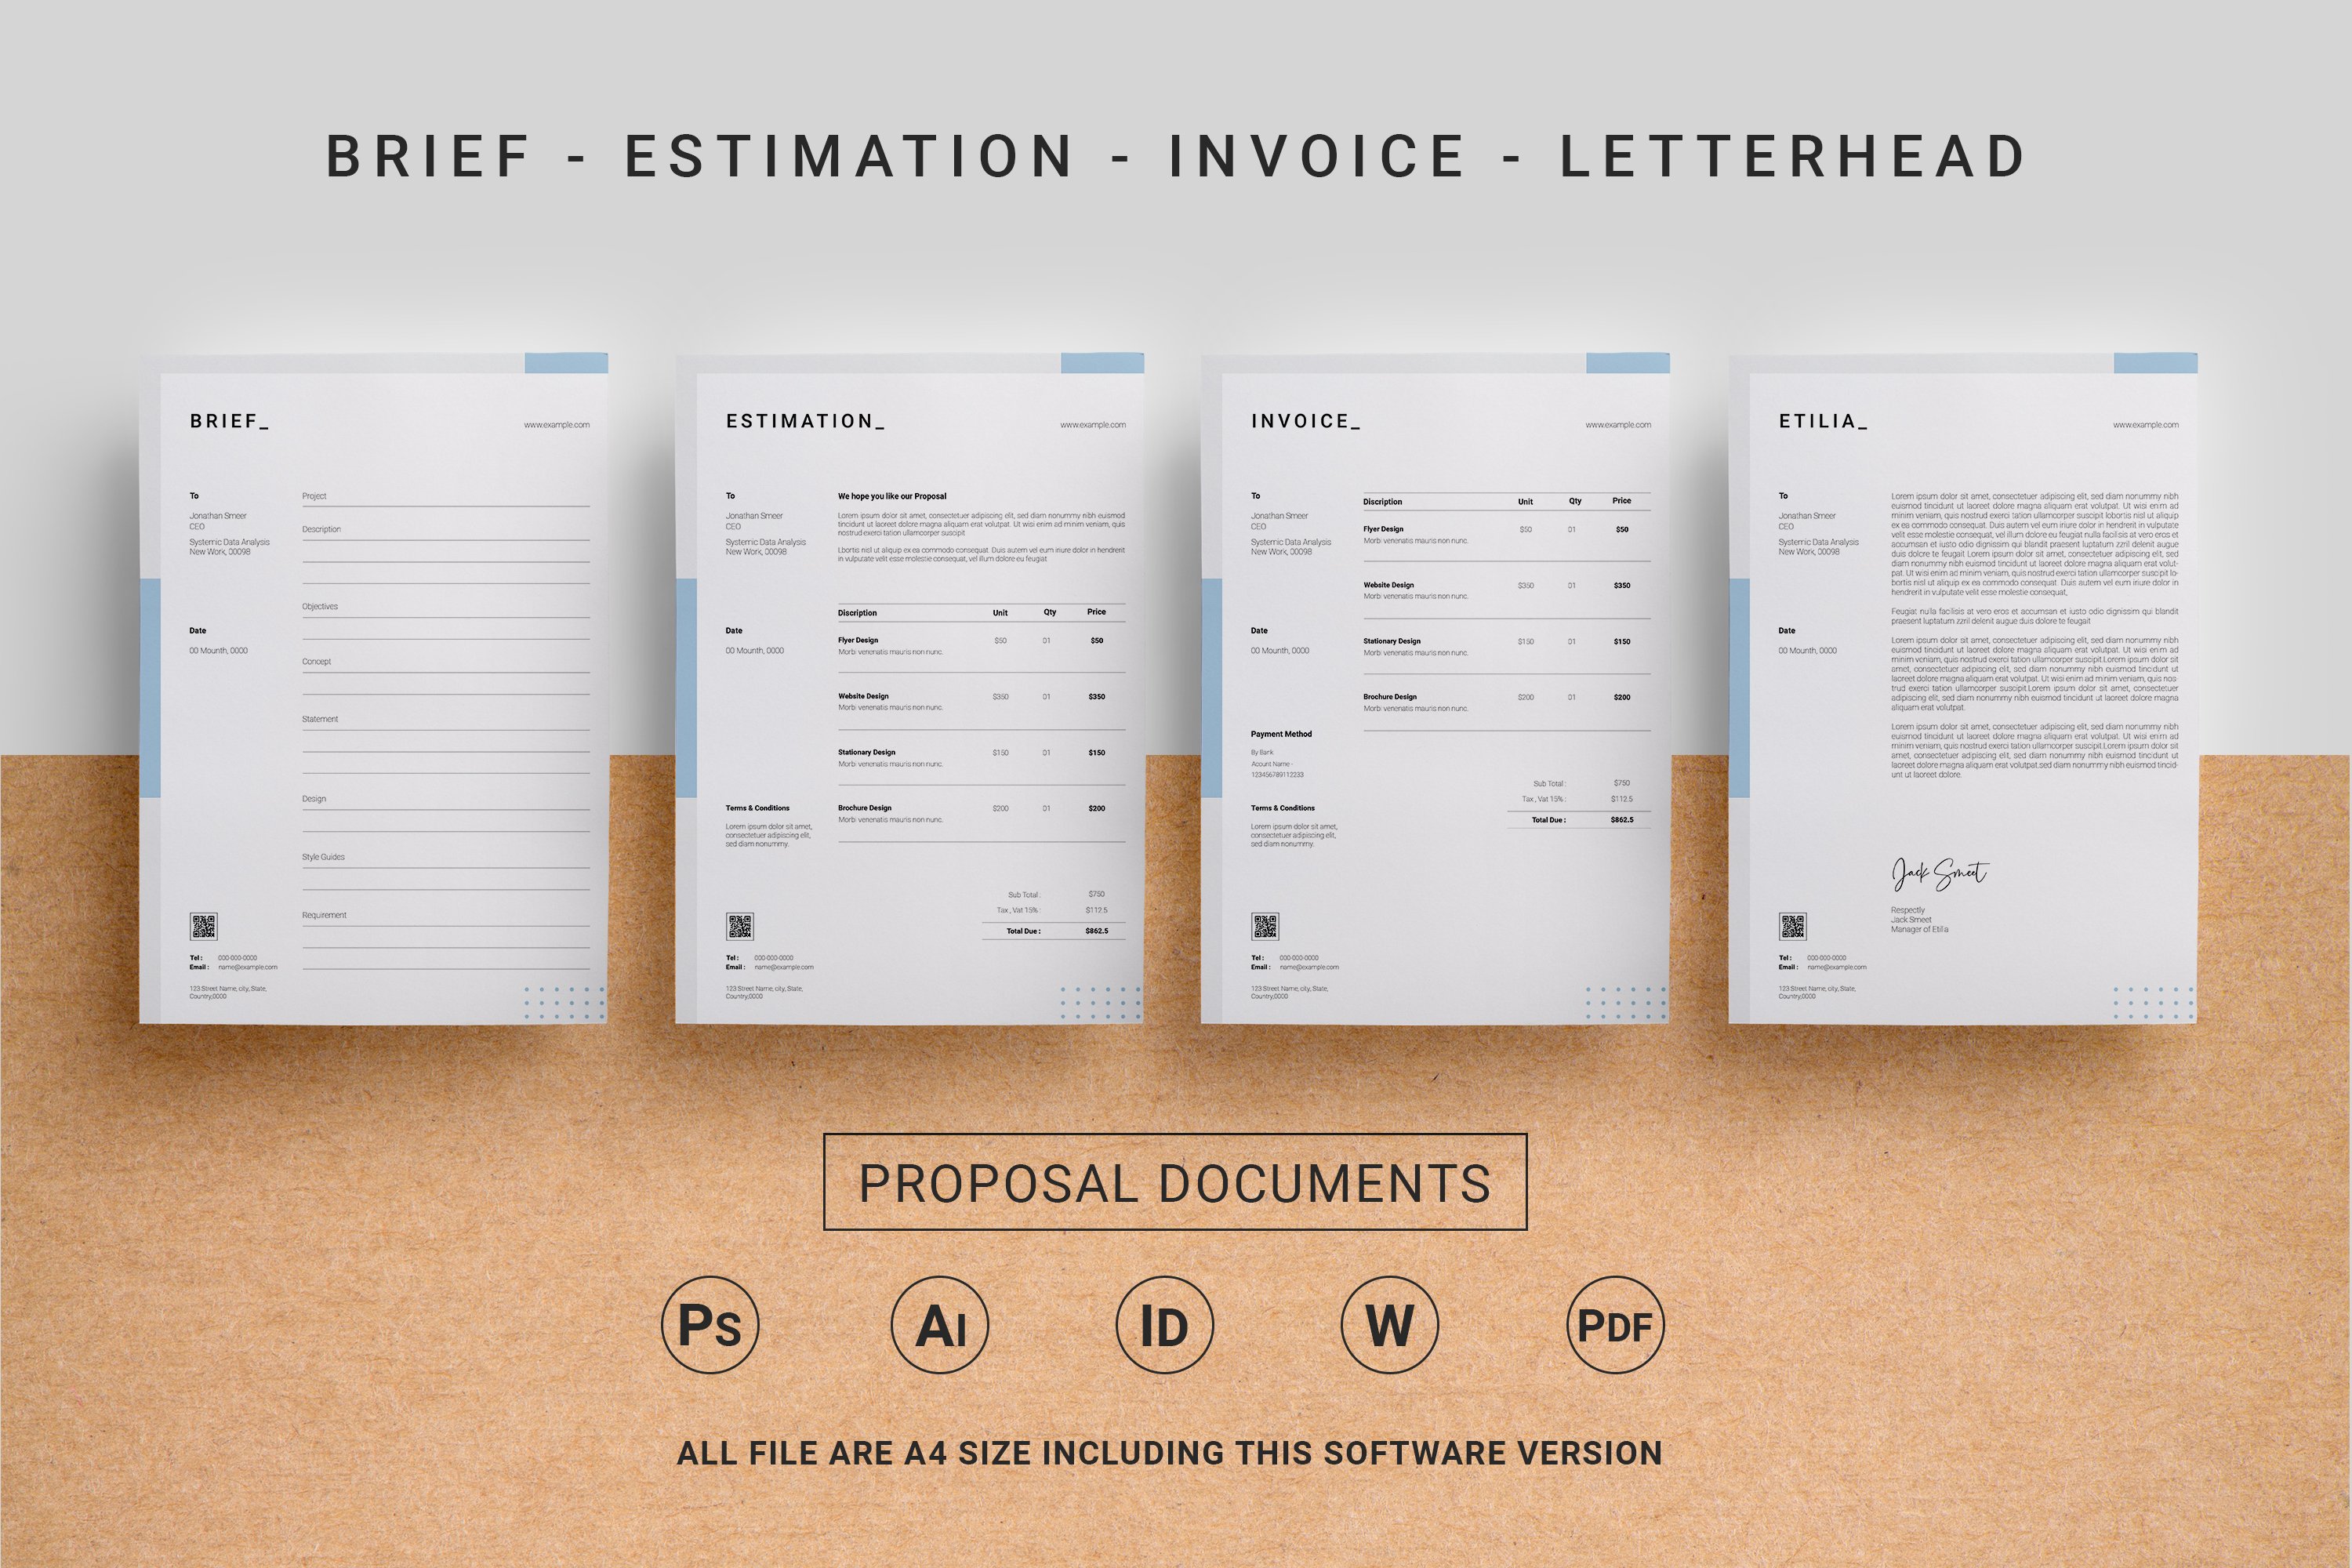 Proposal Document Templates vol-02 cover image.